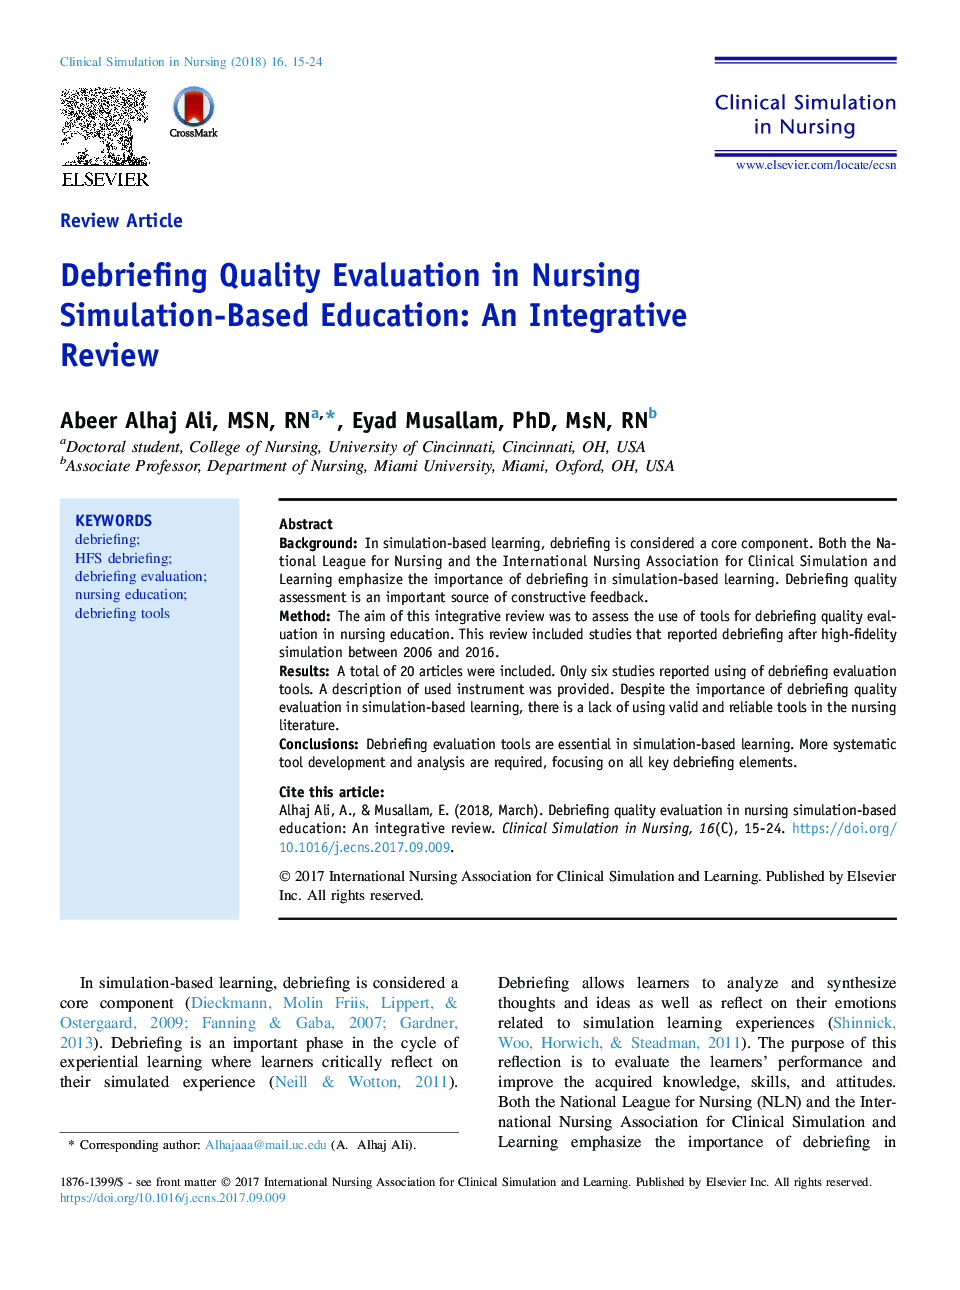 Debriefing Quality Evaluation in Nursing Simulation-Based Education: An Integrative Review